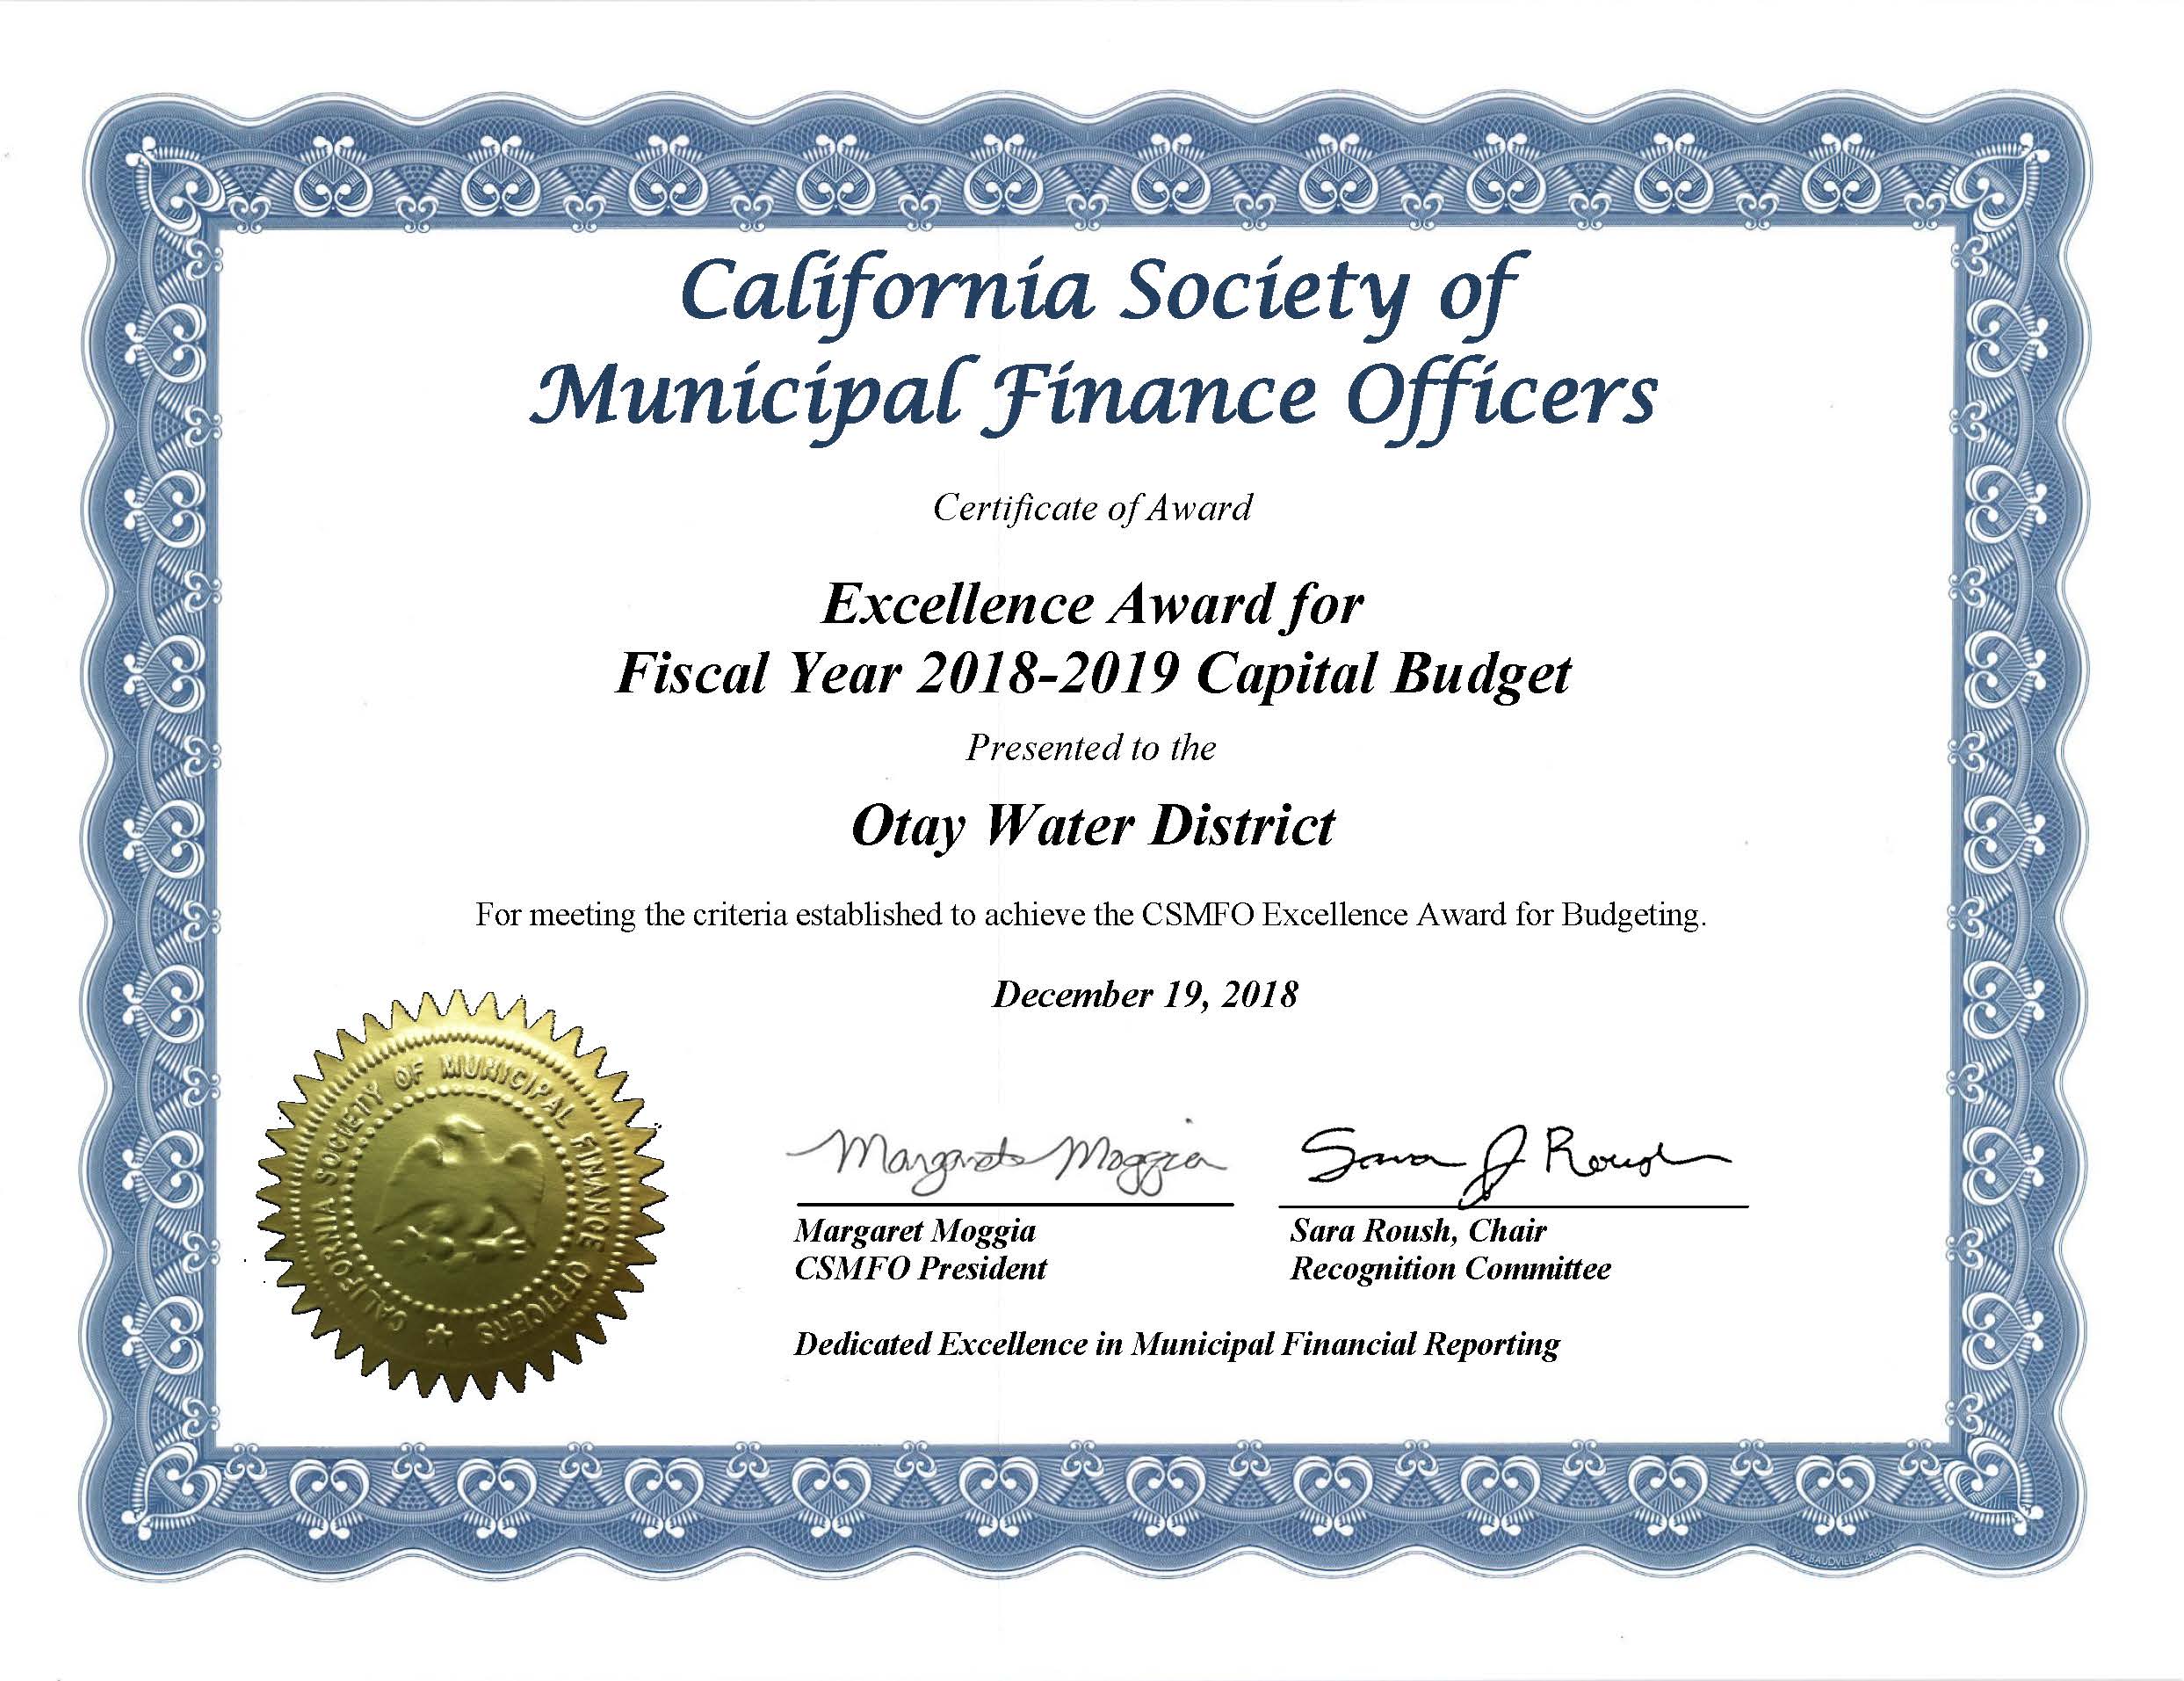 California Society of Municipal Finance Officers Award - Excellence in Capital Budgeting FY 2018-2019